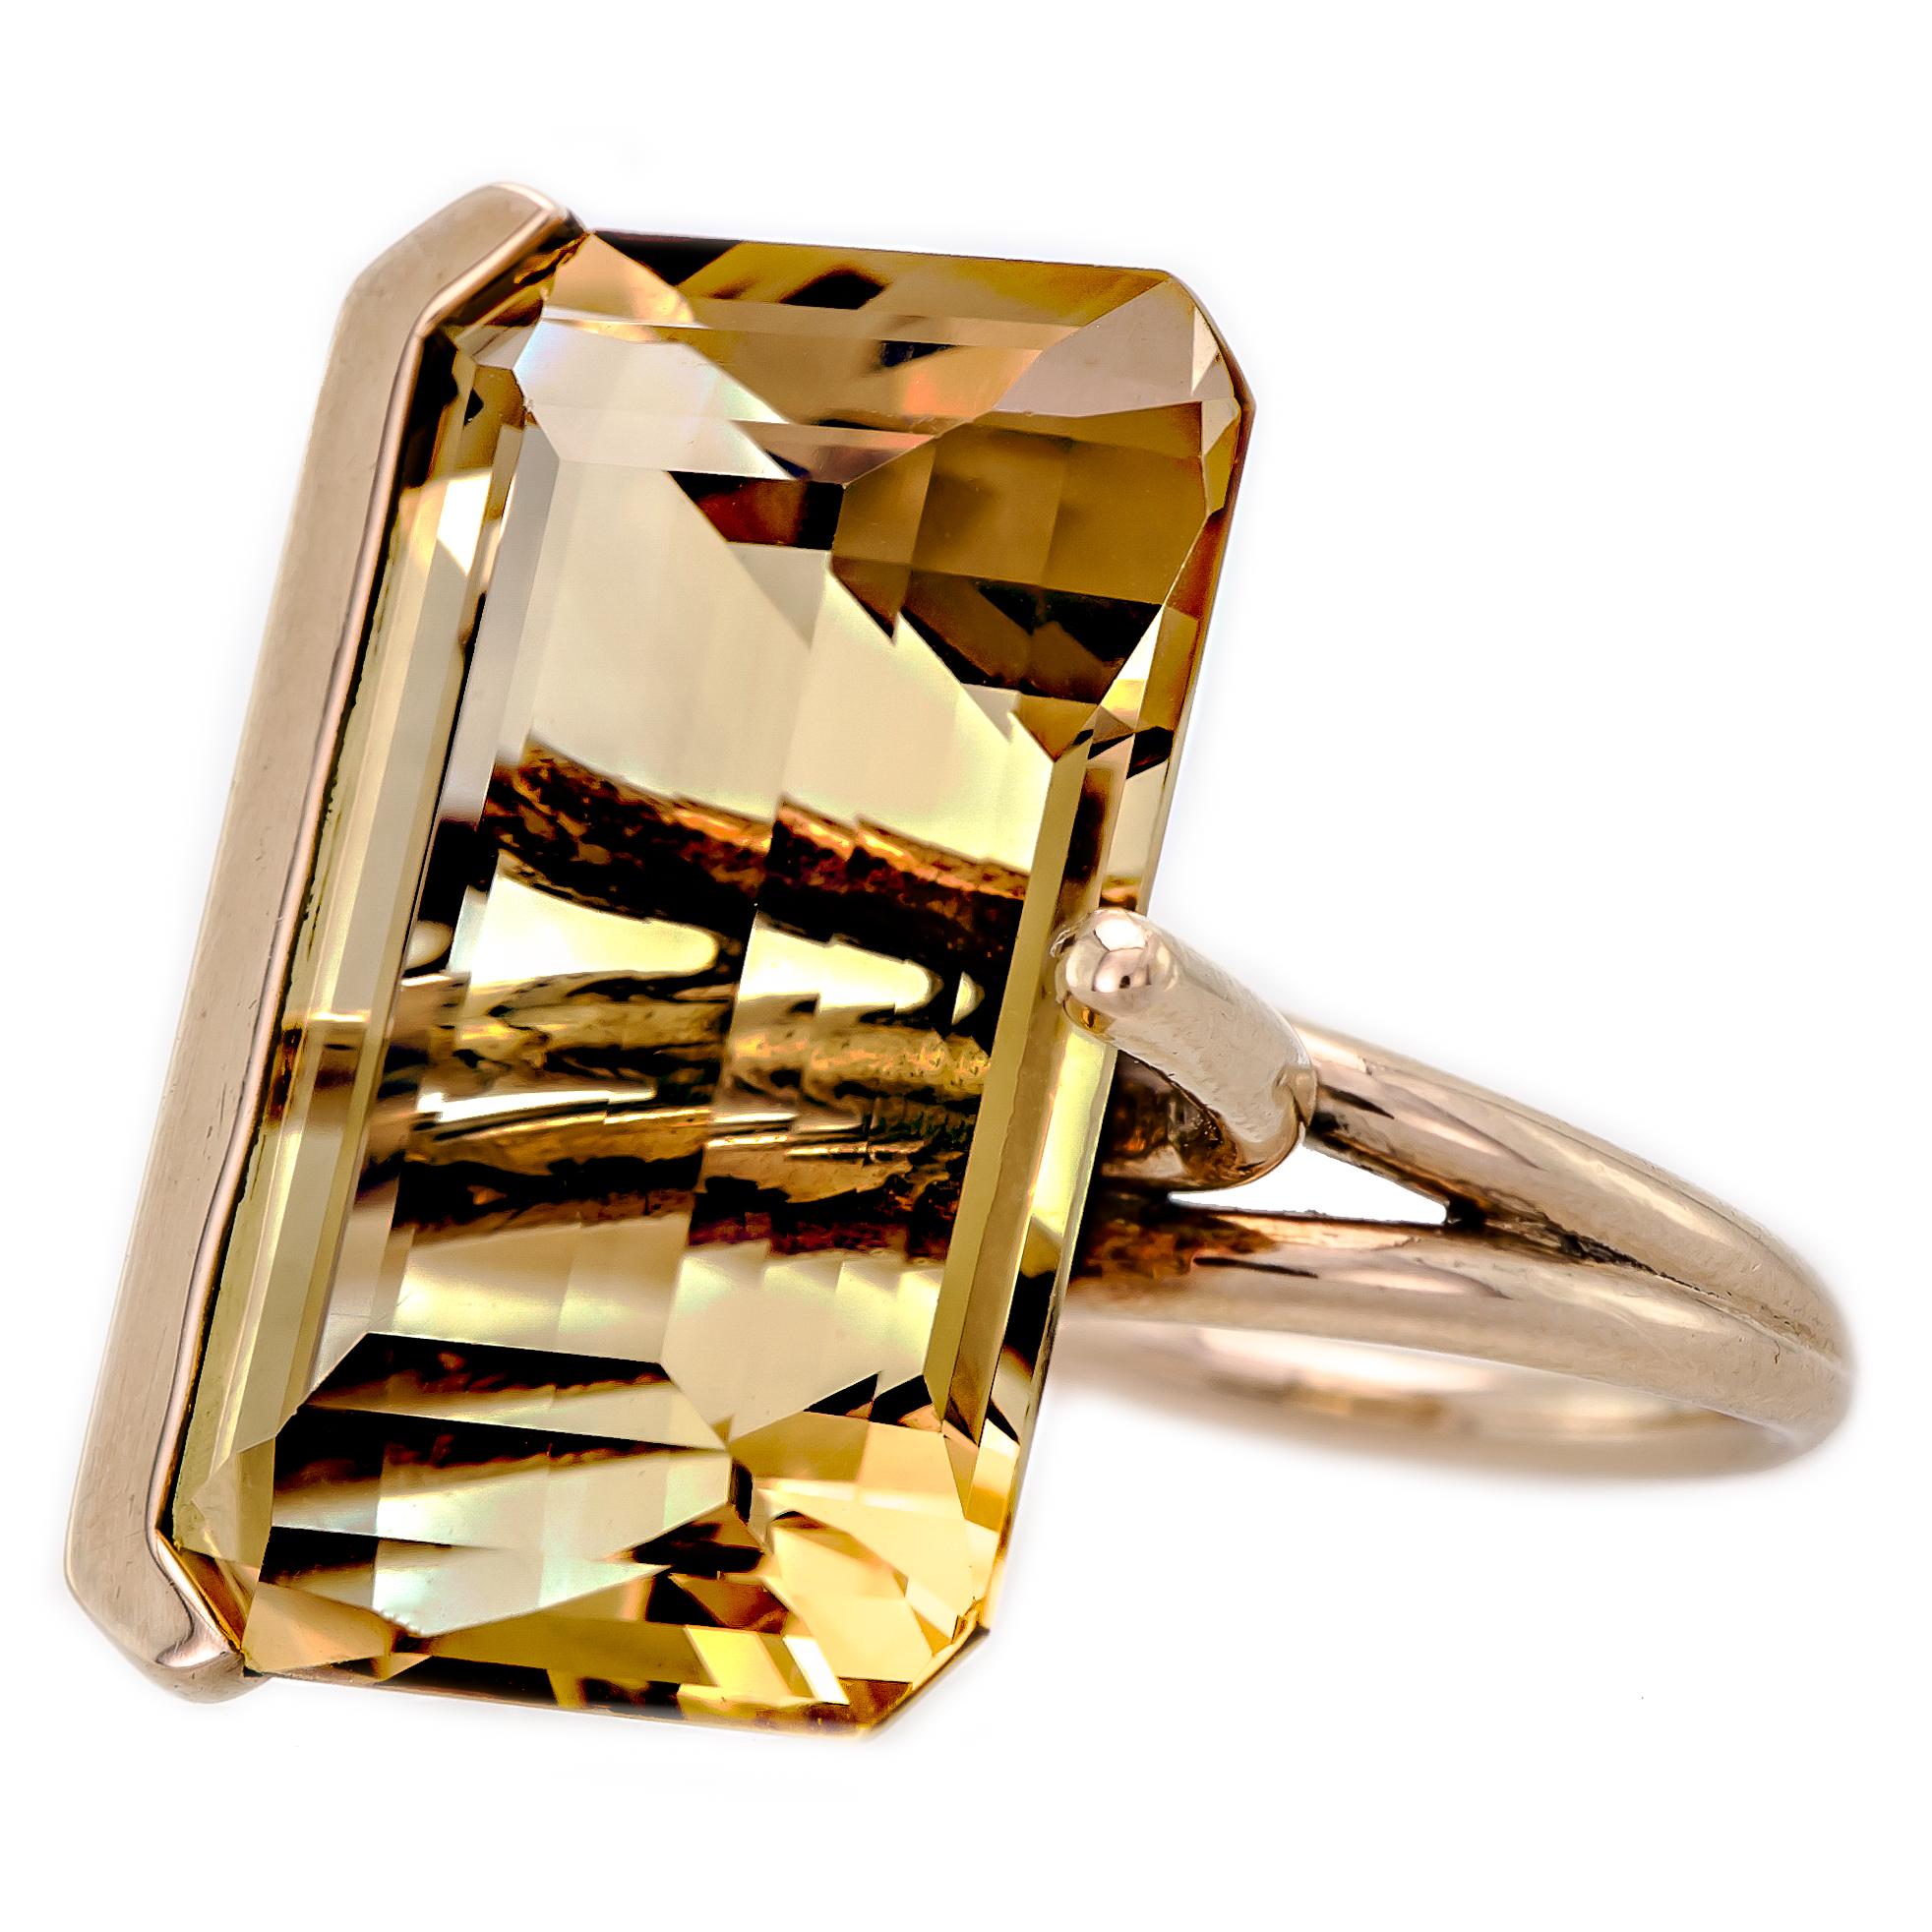 Vintage 14kt yellow gold and citrine cocktail ring containing one octagonal step-cut citrine measuring approximately 26.5mm by 17.4mm by 13.2mm. Stamped 14kt. One small chip to corner of story visible with a loupe. 40.32 cts approximately by